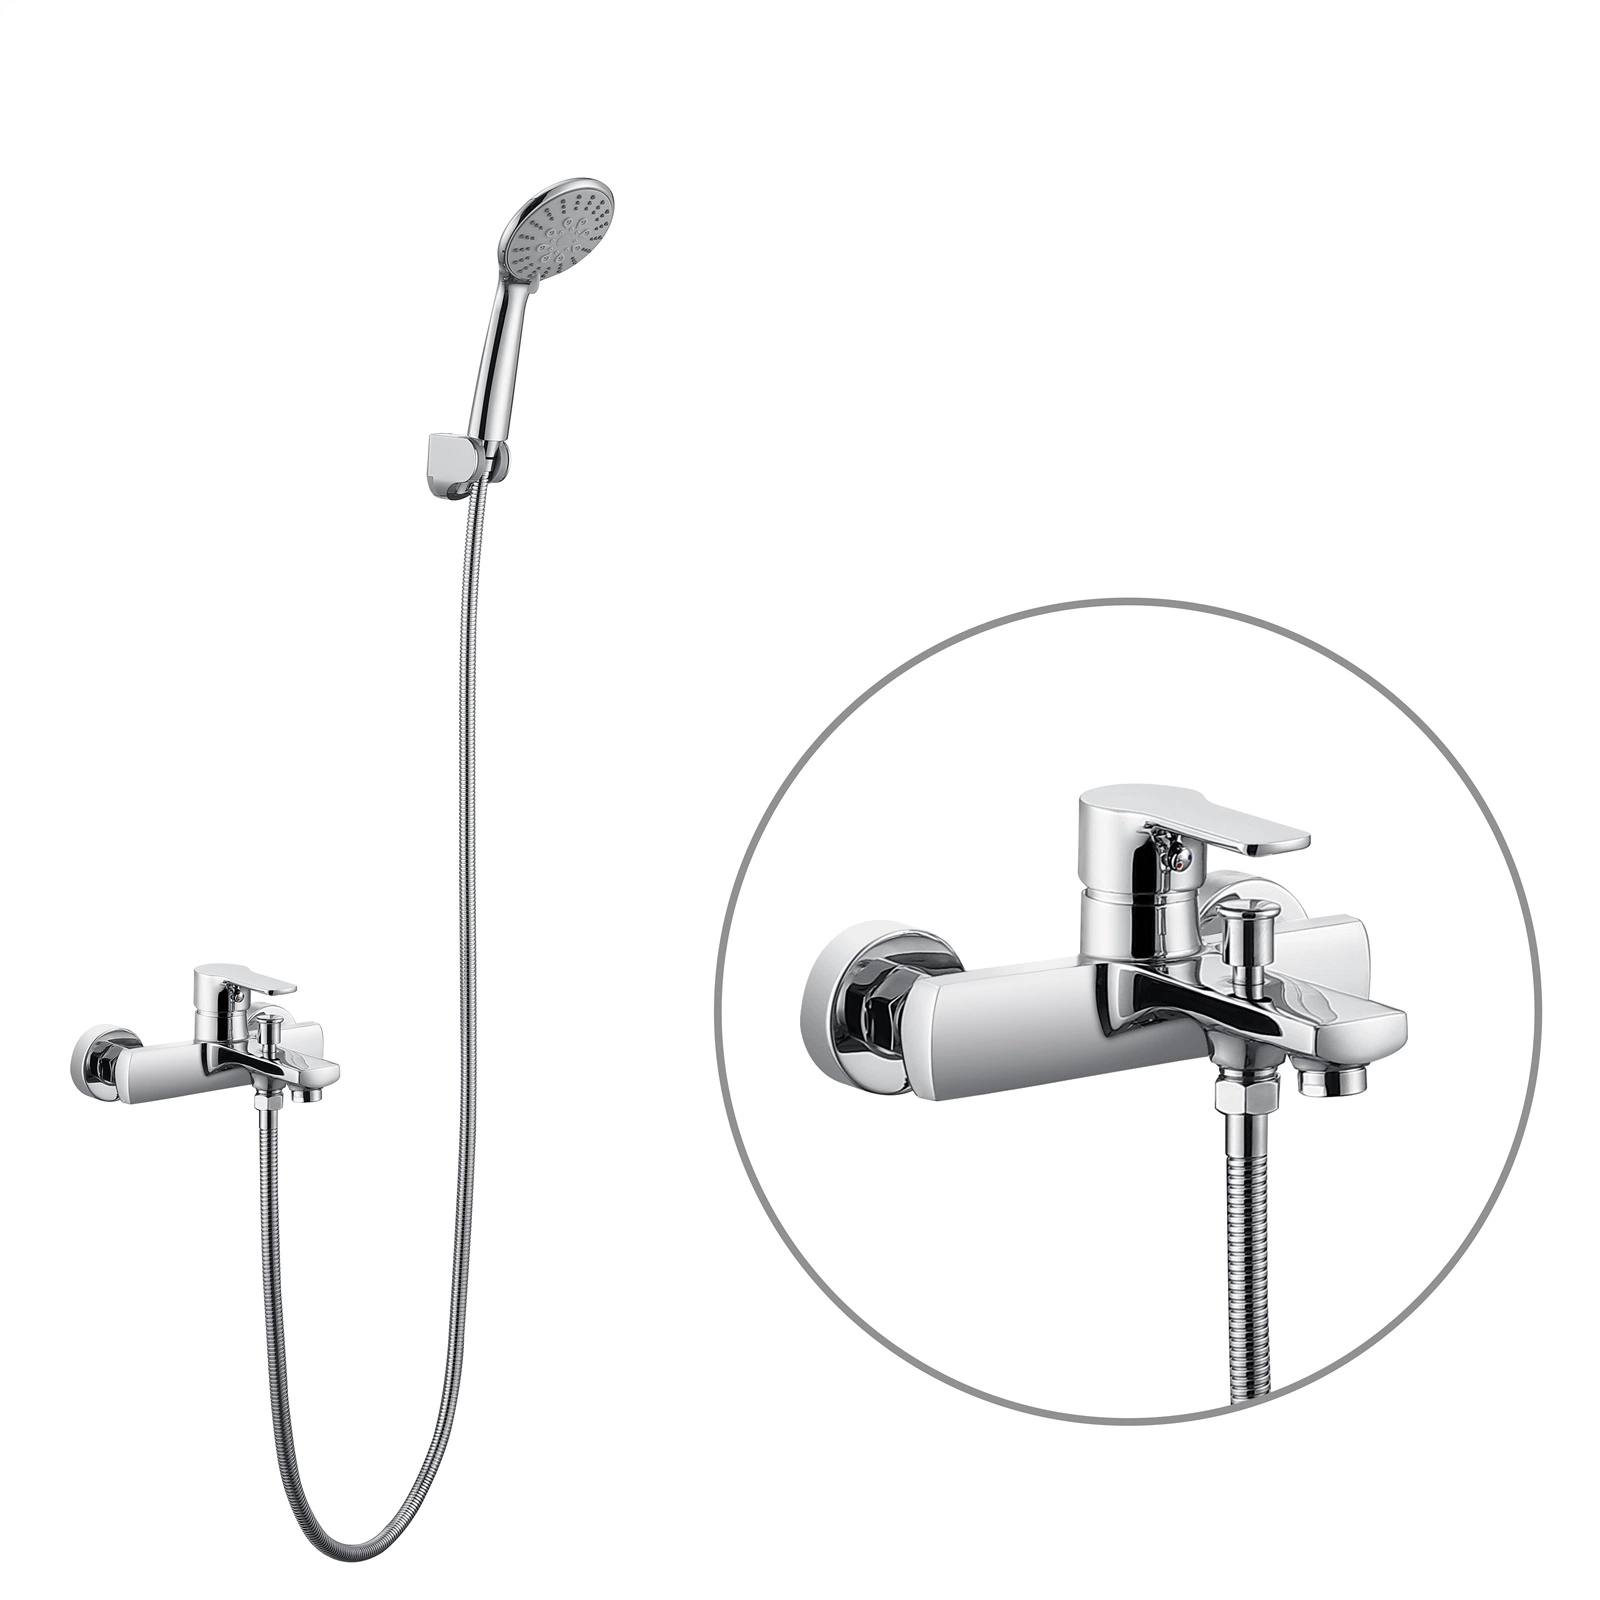 New Design Classical Fashion Simple Bathtub Shower Mixer Set Chromed Finish Easy Installation with Handle Shower